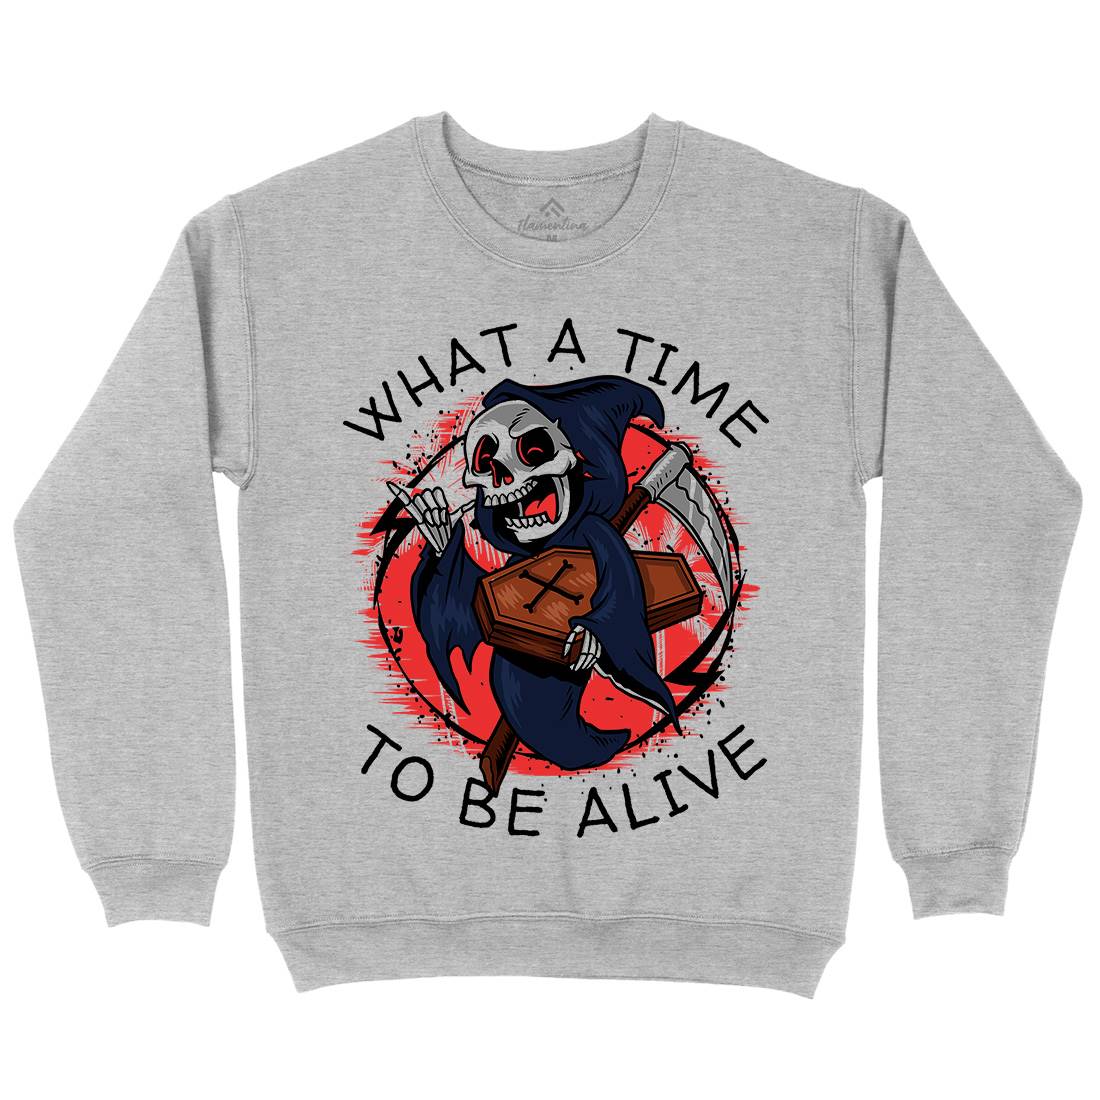 What A Time To Be Alive Kids Crew Neck Sweatshirt Funny D096